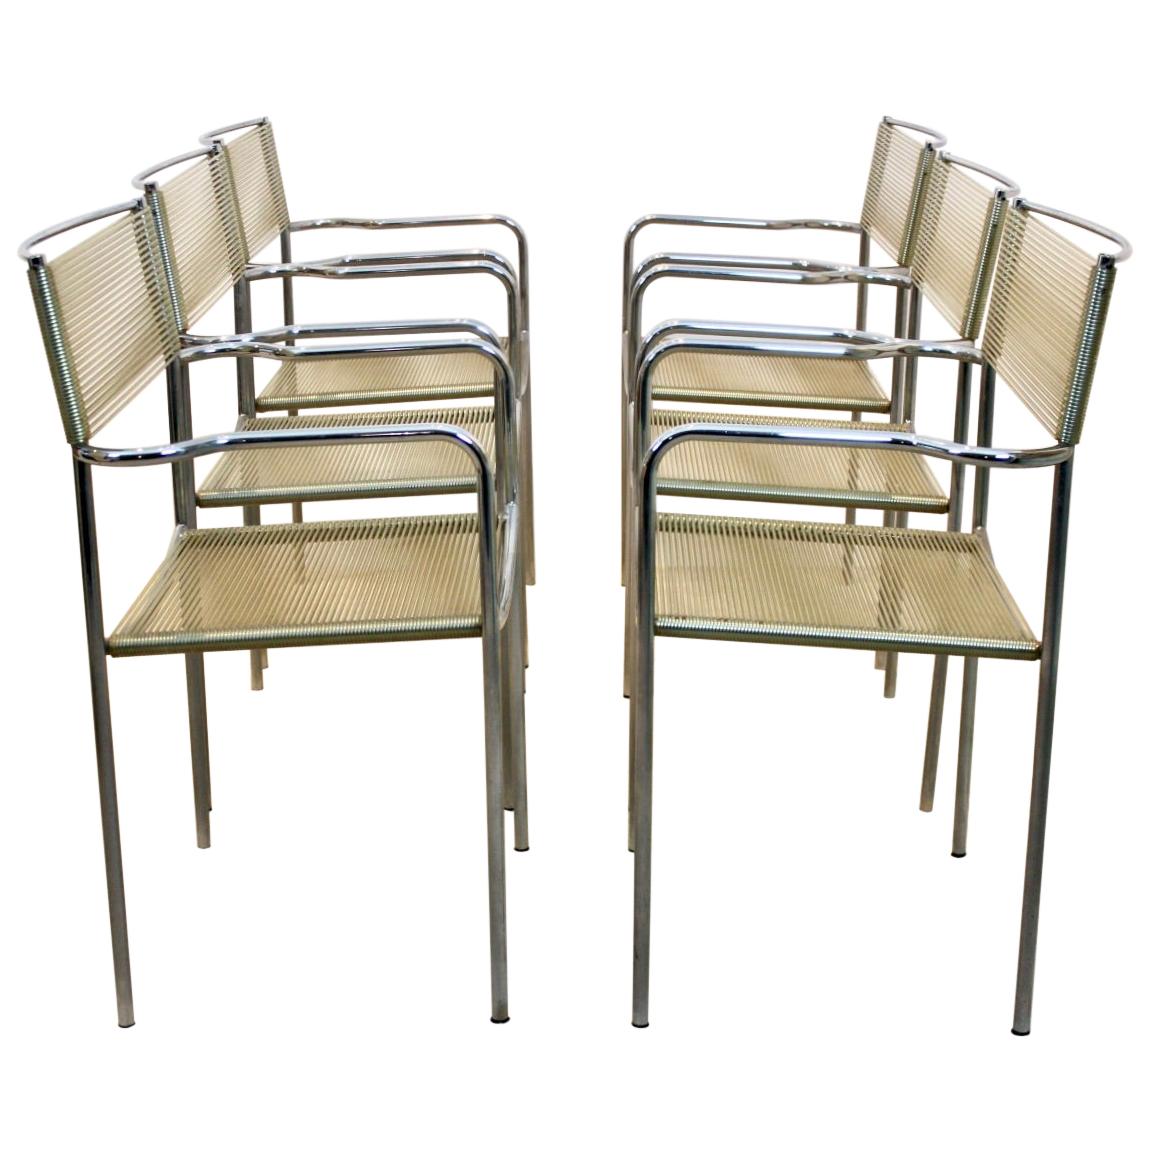 Stylish set of six stackable spaghetti chairs manufactured by Alias in the 70s, branded on the frame. Designed by Giandomenico Belotti, these chairs are included in the collection of the Museum of Modern Art (MoMA) in New York. The chairs have a